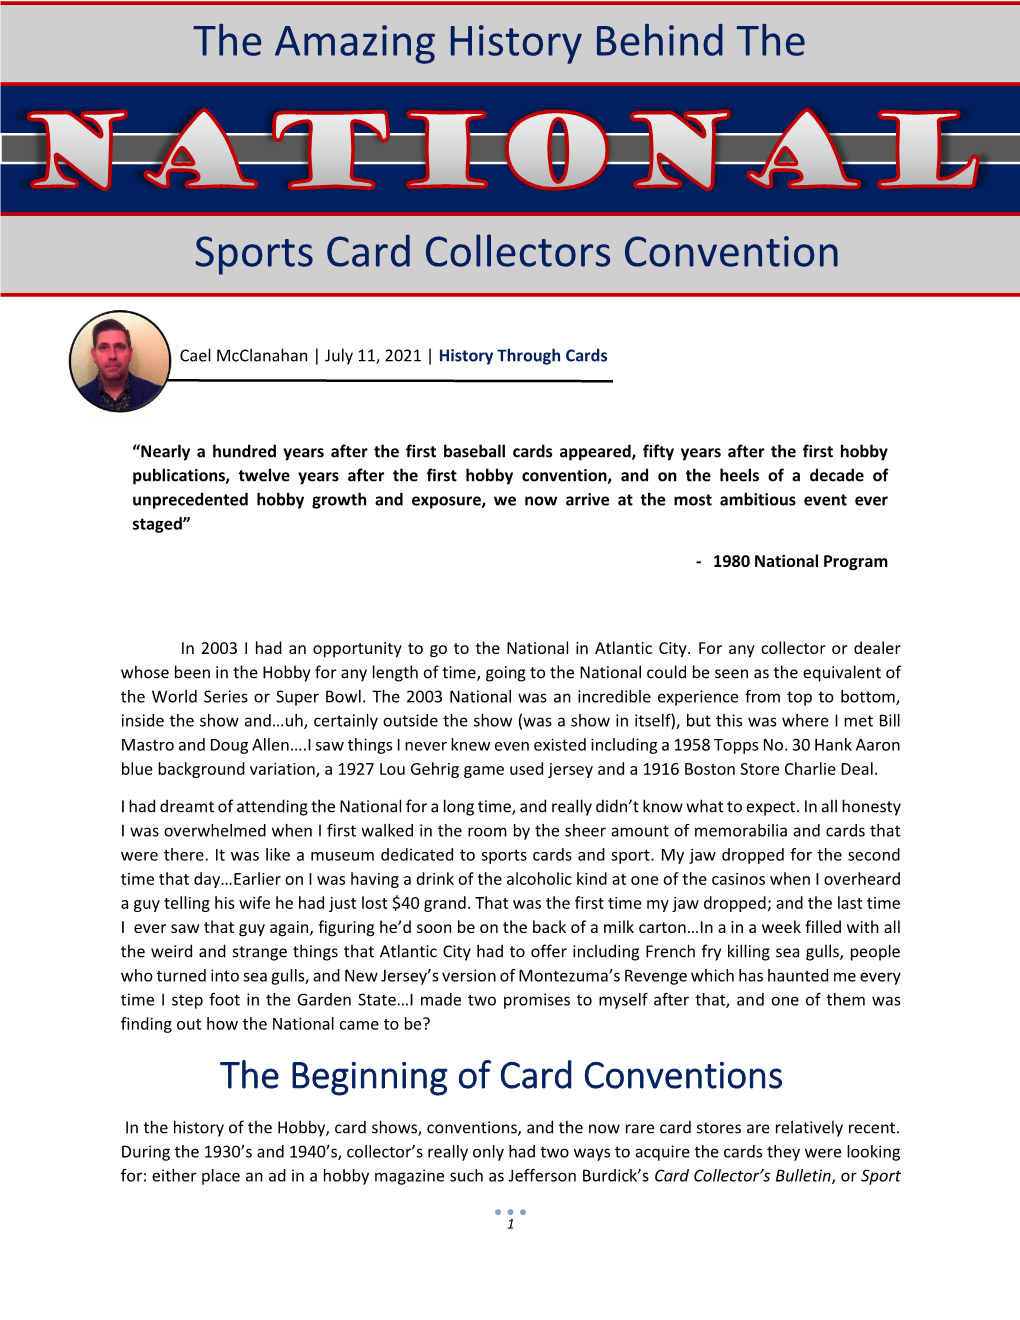 The Amazing History Behind the Sports Card Collectors Convention